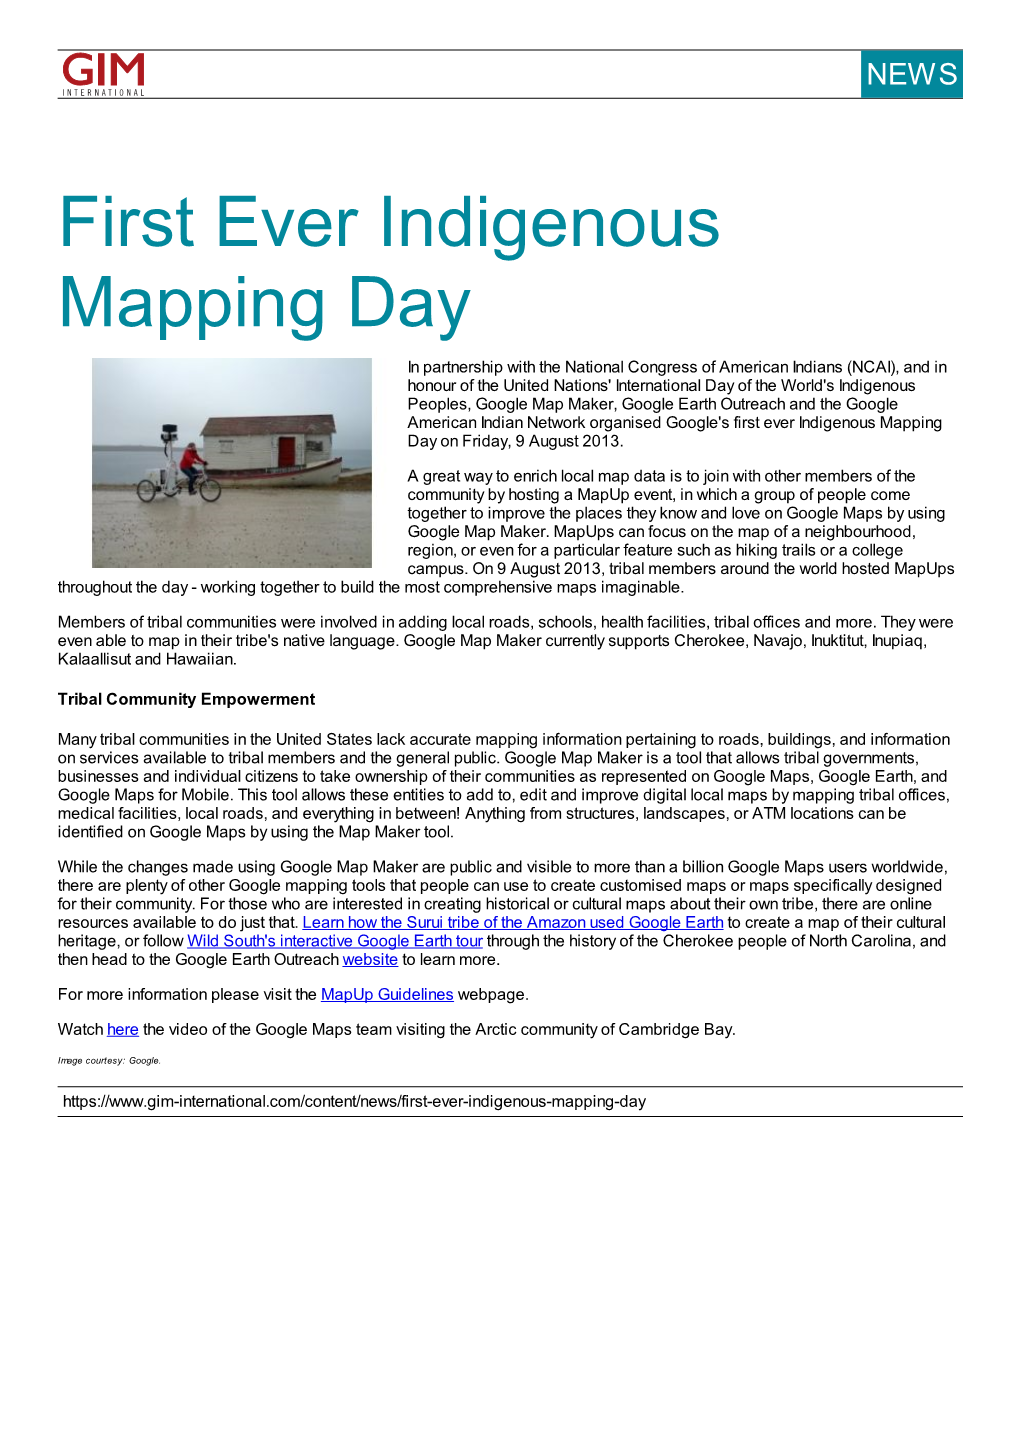 First Ever Indigenous Mapping Day